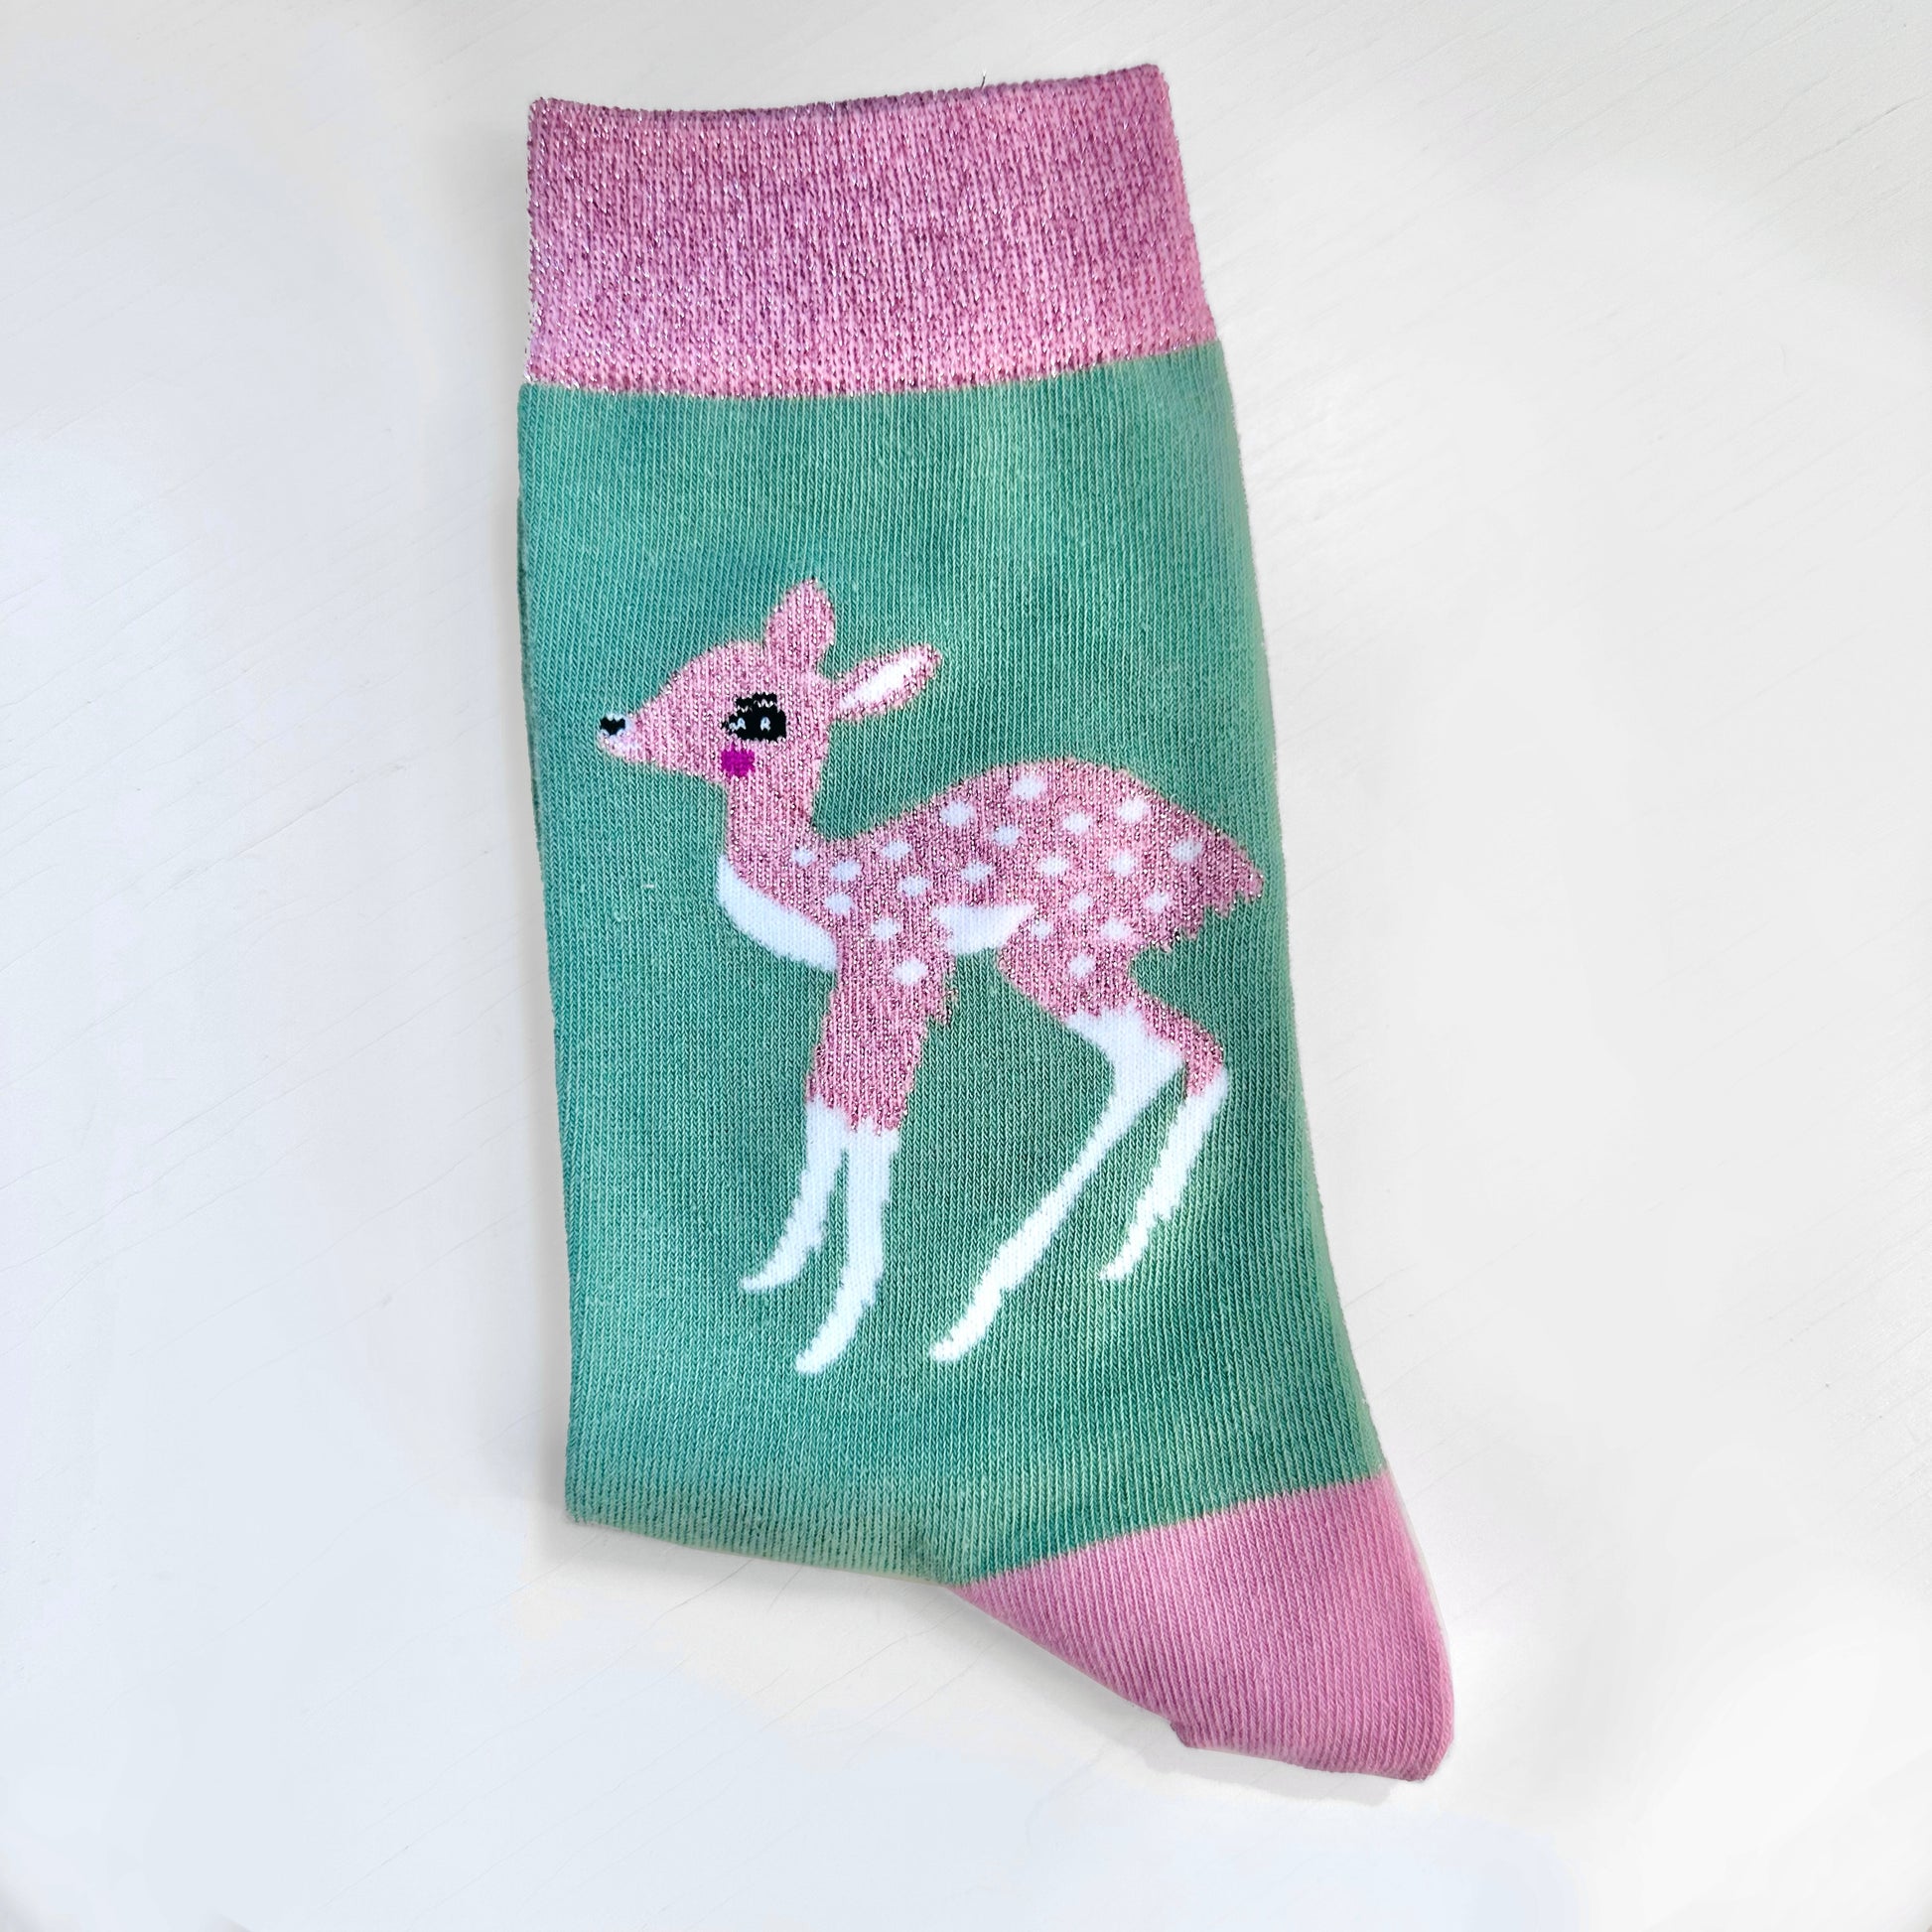 A green and pink sock with a deer on it.